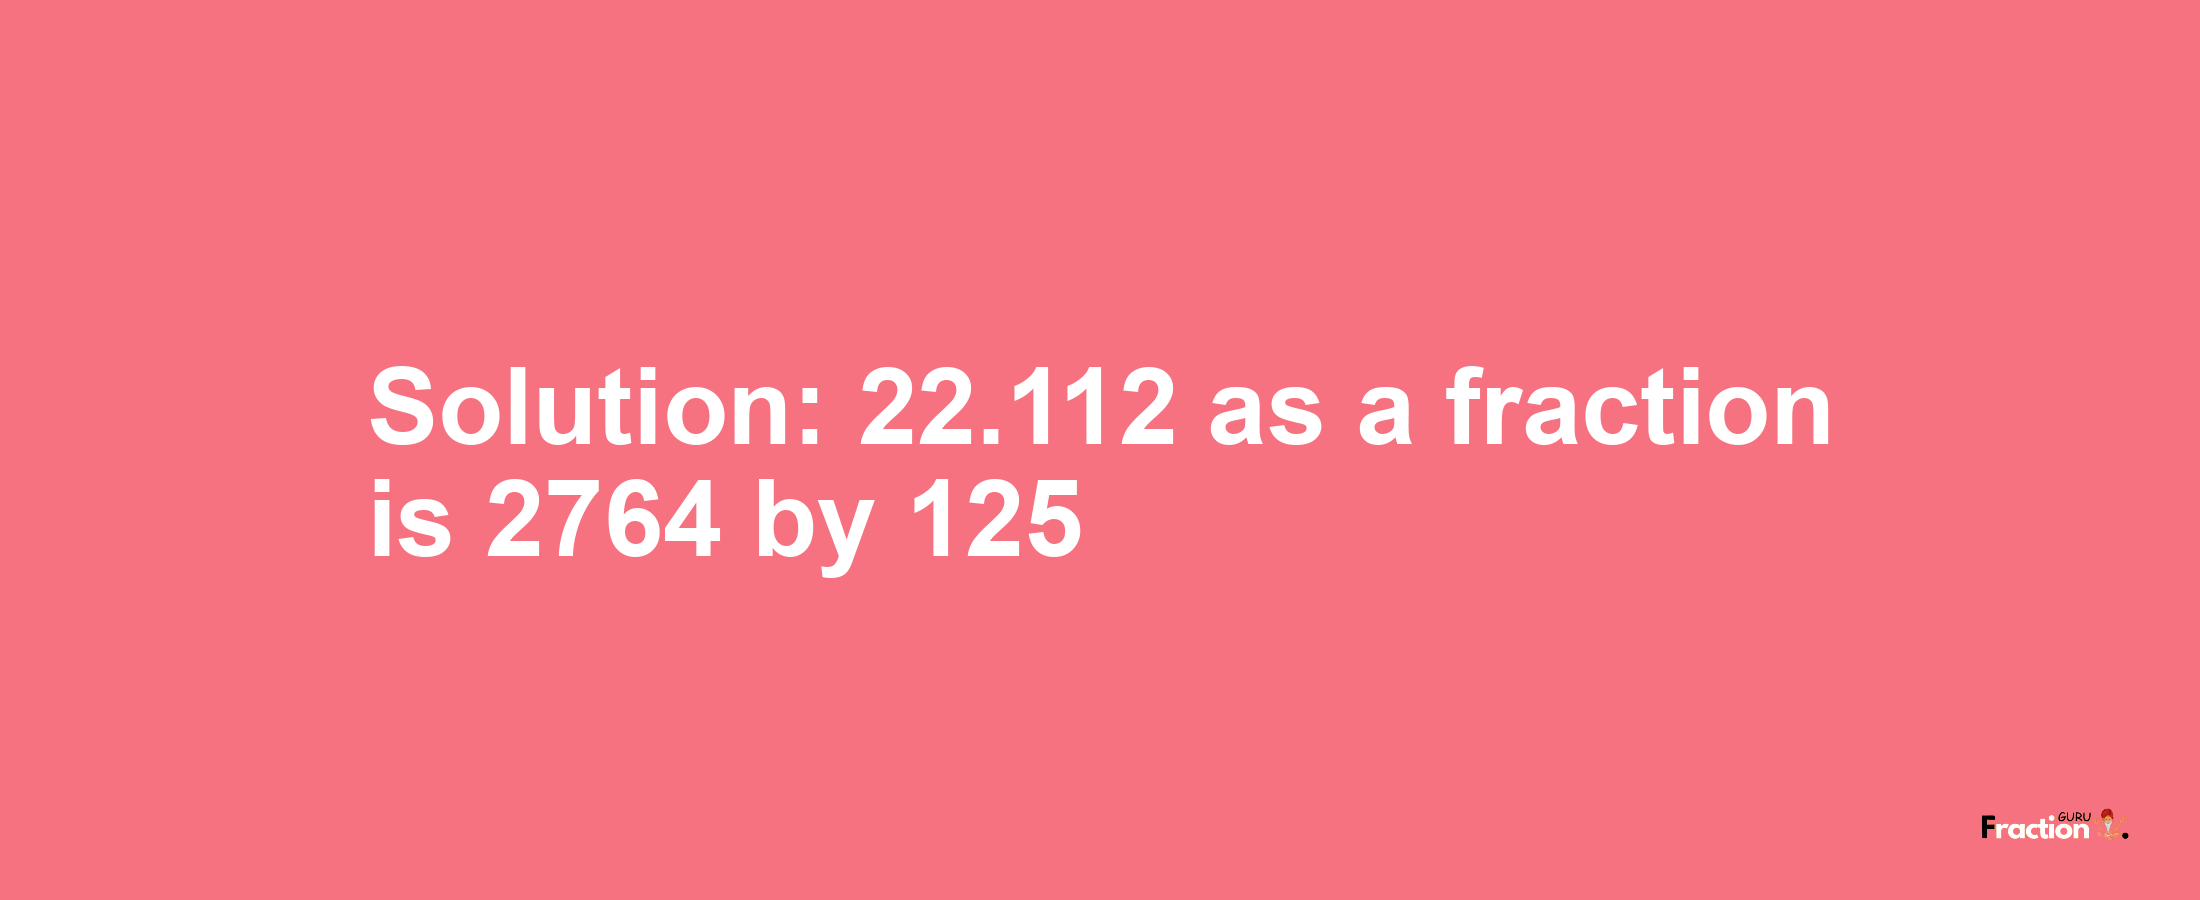 Solution:22.112 as a fraction is 2764/125